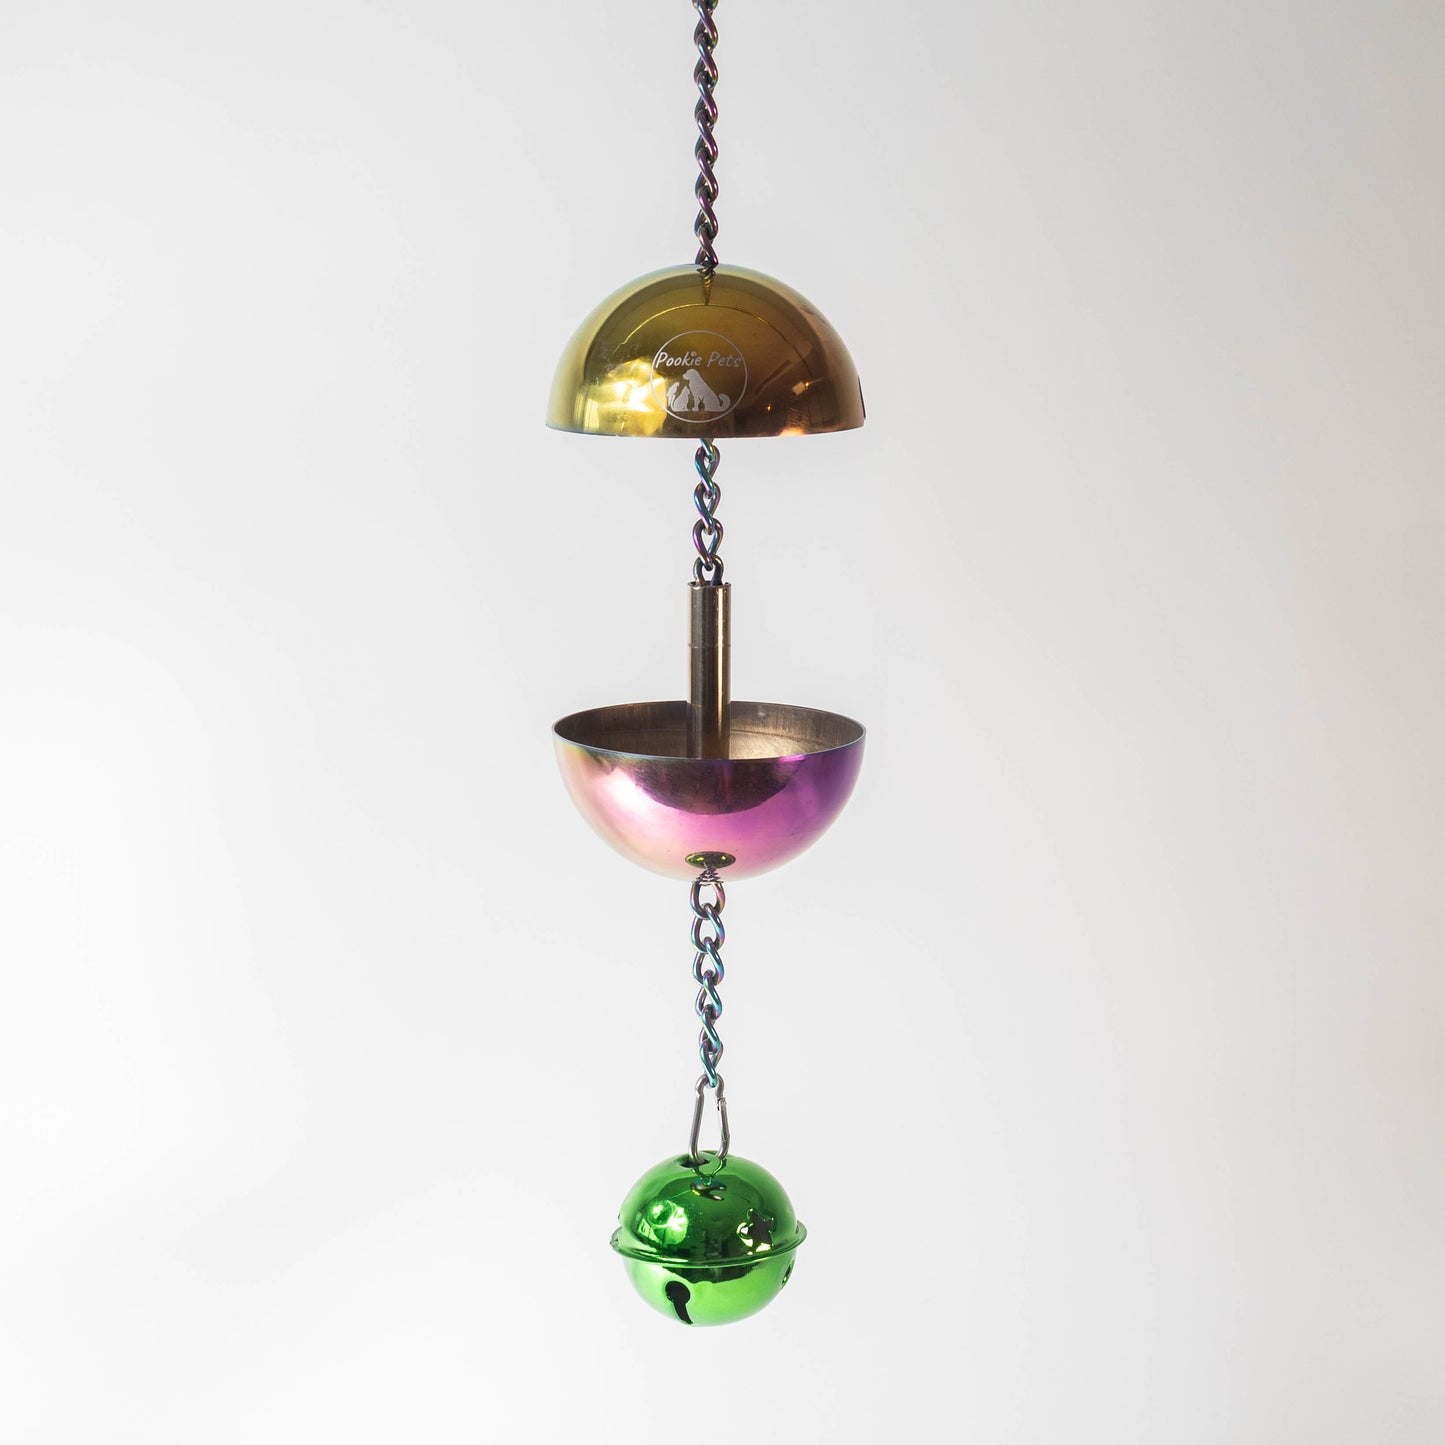 Stainless Steel Parrot Foraging Toy: Engage Your Bird's Natural Instincts